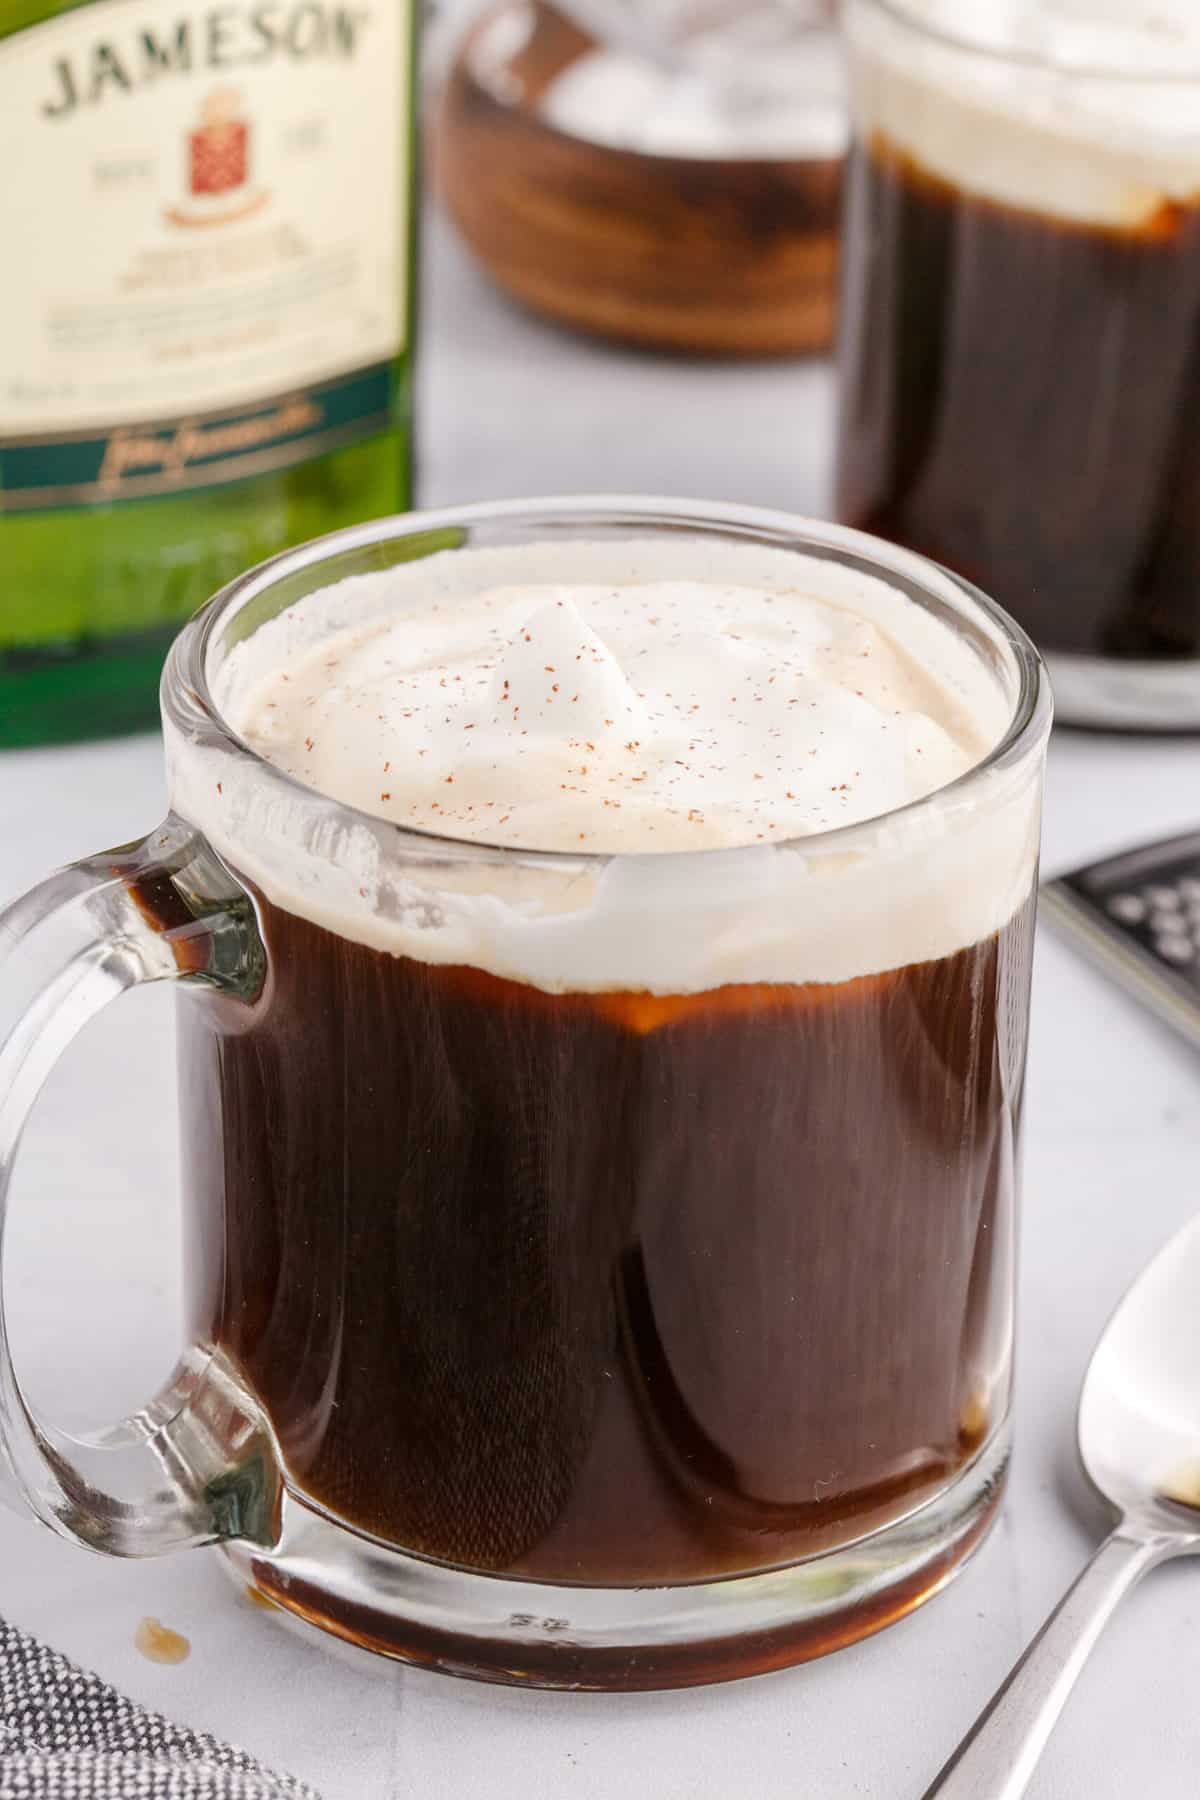 A glass mug filled with irish coffee and whipped cream is placed next to a spoon.